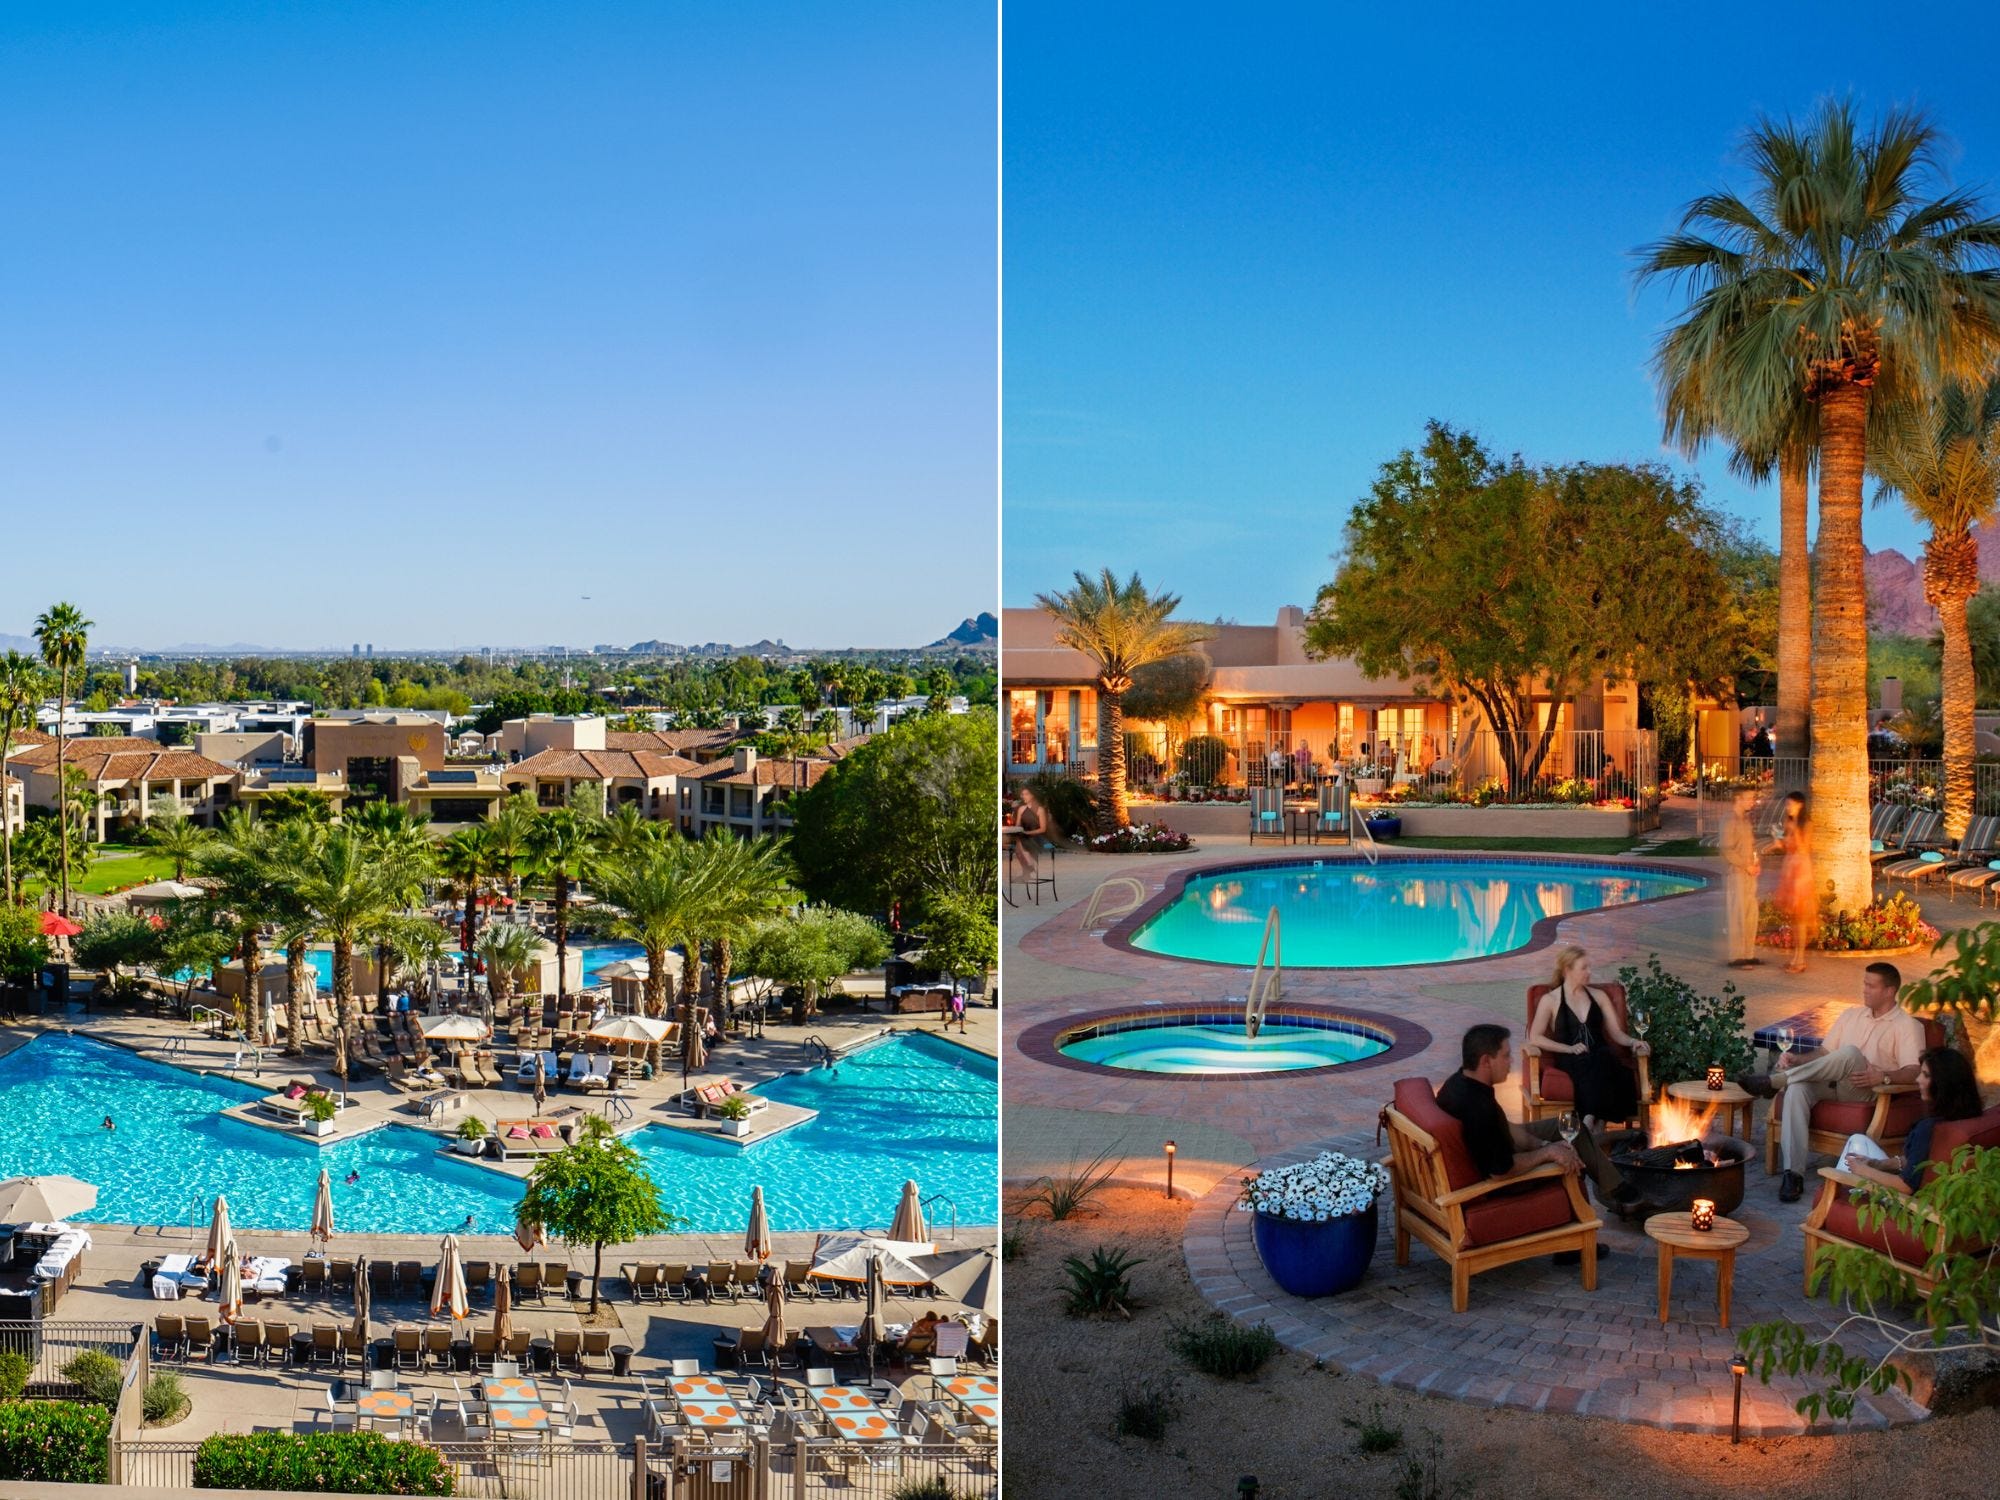 <ul class="summary-list"><li>Scottsdale, Arizona, has become a popular destination for luxury travelers.</li><li>The Phoenician and Hermosa Inn are among Arizona's top luxury hotel offerings.</li><li>I stayed in both and had two completely different experiences.</li></ul><p>Arizona is a hot spot for <a href="https://www.businessinsider.com/what-travelers-splurge-on-for-vacation-trends-2023-11">luxury travelers</a>.</p><p>The state is known for its award-winning travel offerings, from high-end resorts and spas to pristine golf courses and awe-inspiring desert landscapes, <a href="https://www.cntraveler.com/story/arizona-resorts">Condé Nast Traveler reported in 2023</a>.</p><p>This is especially true in Scottsdale.</p><p>In 2022, the city outside Phoenix hosted roughly 11 million tourists, from day trippers to overnight visitors, who spent a total of $3.2 billion, <a href="https://www.scottsdaleaz.gov/Assets/ScottsdaleAZ/Tourism+Reports/2023+Visitor+Report.pdf">according to the city's Tourism and Events department</a>.</p><p class="gnt_ar_b_p">I recently visited the Southwest desert town and stayed at two of Arizona's four-star top hotels — <a href="https://www.businessinsider.com/guides/travel/best-hotels-scottsdale">The Phoenician</a> in Scottsdale and the Hermosa Inn in Paradise Valley, a nearby town known as "<a href="https://www.businessinsider.com/paradise-valley-arizona-wealthy-californians-moving-privacy-luxury-lower-taxes-2024-2">the Beverly Hills of Arizona</a>." </p><p class="gnt_ar_b_p">The Phoenician was named "Arizona's Leading Resort" in the <a href="https://www.worldtravelawards.com/about">2023 World Travel Awards</a>. It also received the Forbes Travel Guide Four-Star Award in 2024 for the 22nd time in a row, <a href="https://www.thephoenician.com/awards-accolades/">according to the hotel's website</a>.</p><p>Meanwhile, the Hermosa Inn is a boutique establishment that <a href="https://www.travelandleisure.com/best-arizona-resort-hotels-2023-7508977">Travel + Leisure</a> named the best hotel in Arizona in 2023.</p><p>I had top-tier <a href="https://www.businessinsider.com/disney-world-private-tour-what-its-really-like-worth-it-2023-1">VIP experiences</a> at both establishments, but the vibes at each couldn't have been more different. Ultimately, I think they were made for two different vacations.</p><div class="read-original">Read the original article on <a href="https://www.businessinsider.com/arizona-best-hotels-phoenician-scottsdale-hermosa-inn-paradise-valley-photos-2024-4">Business Insider</a></div>